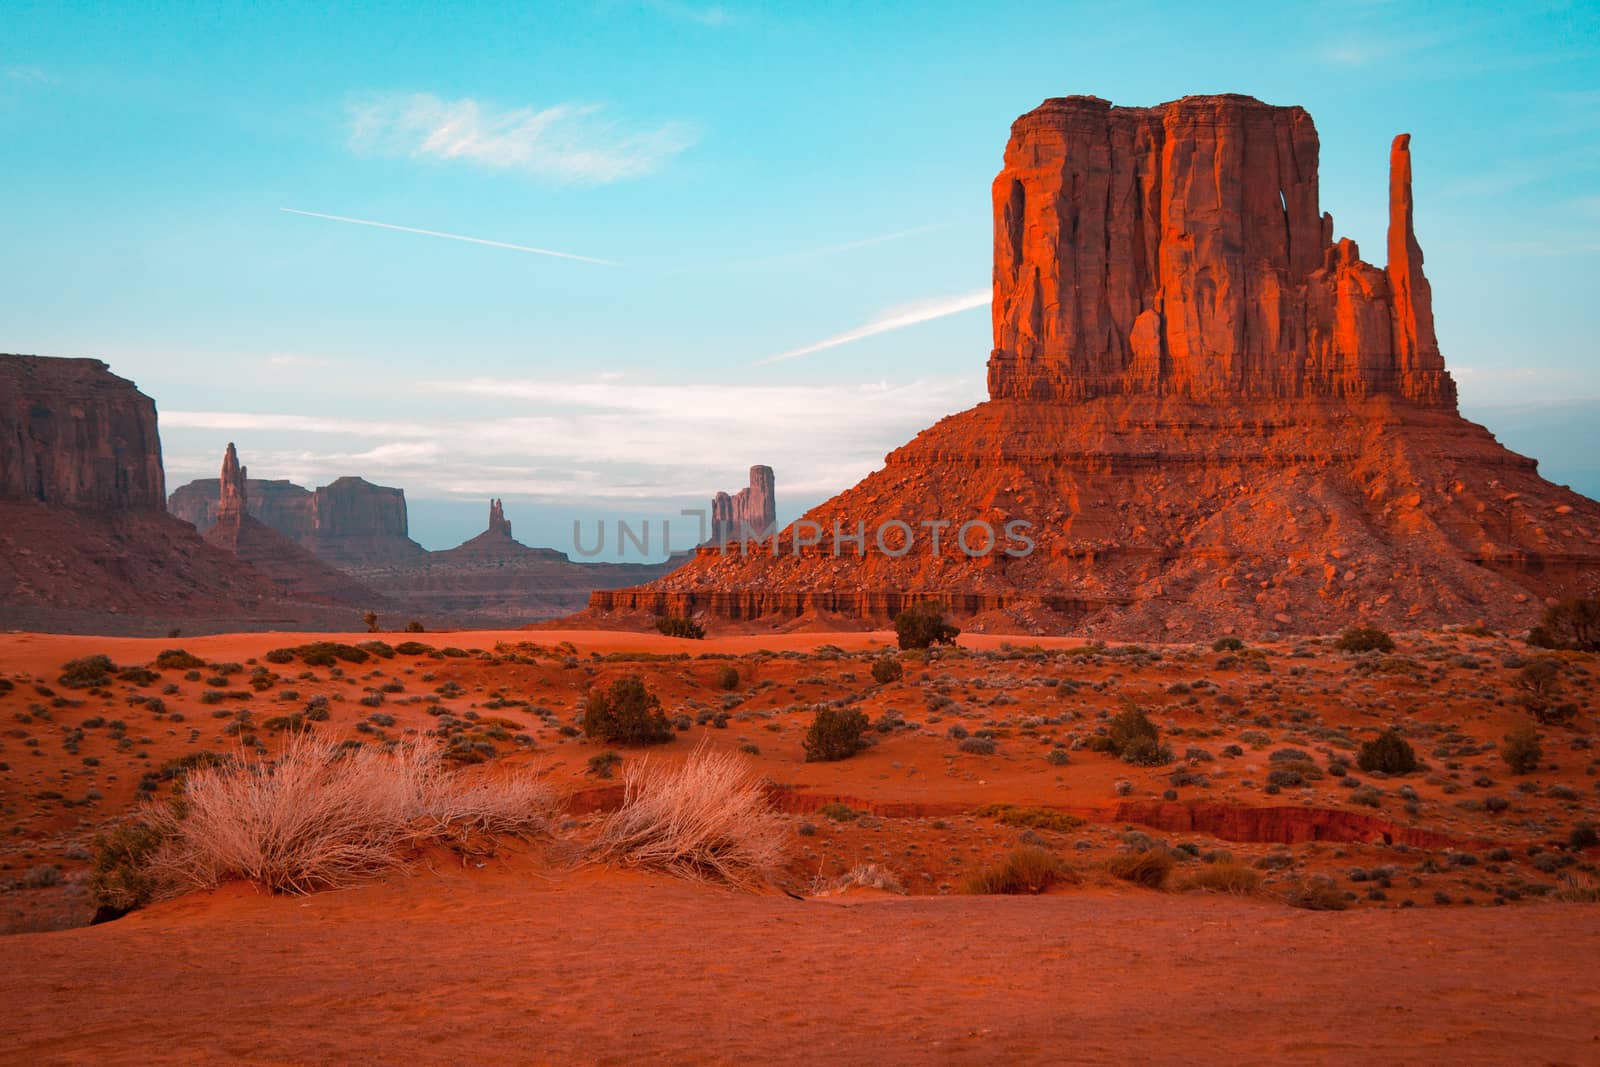 Orange and teal sunset view at Monument Valley, Arizona, USA by tanaonte